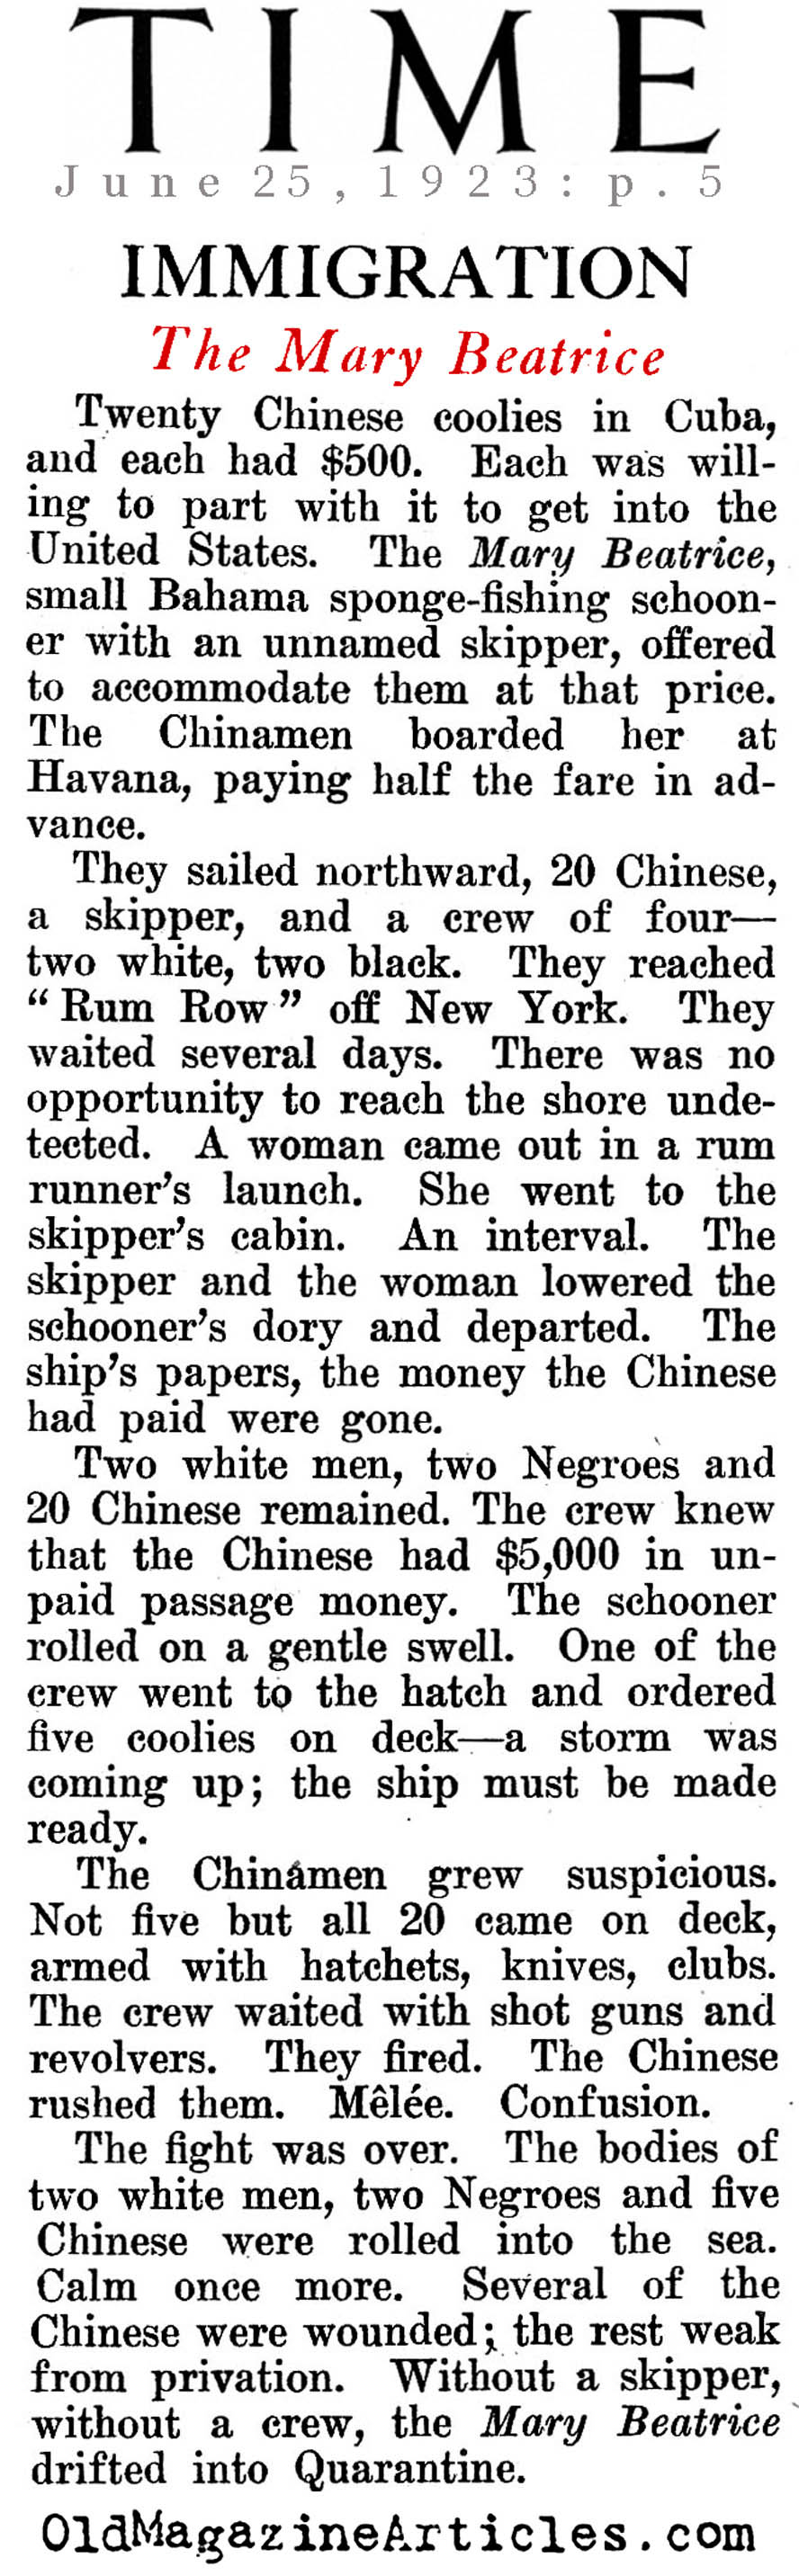 Chinese Migration and Law (Time Magazine, 1923)